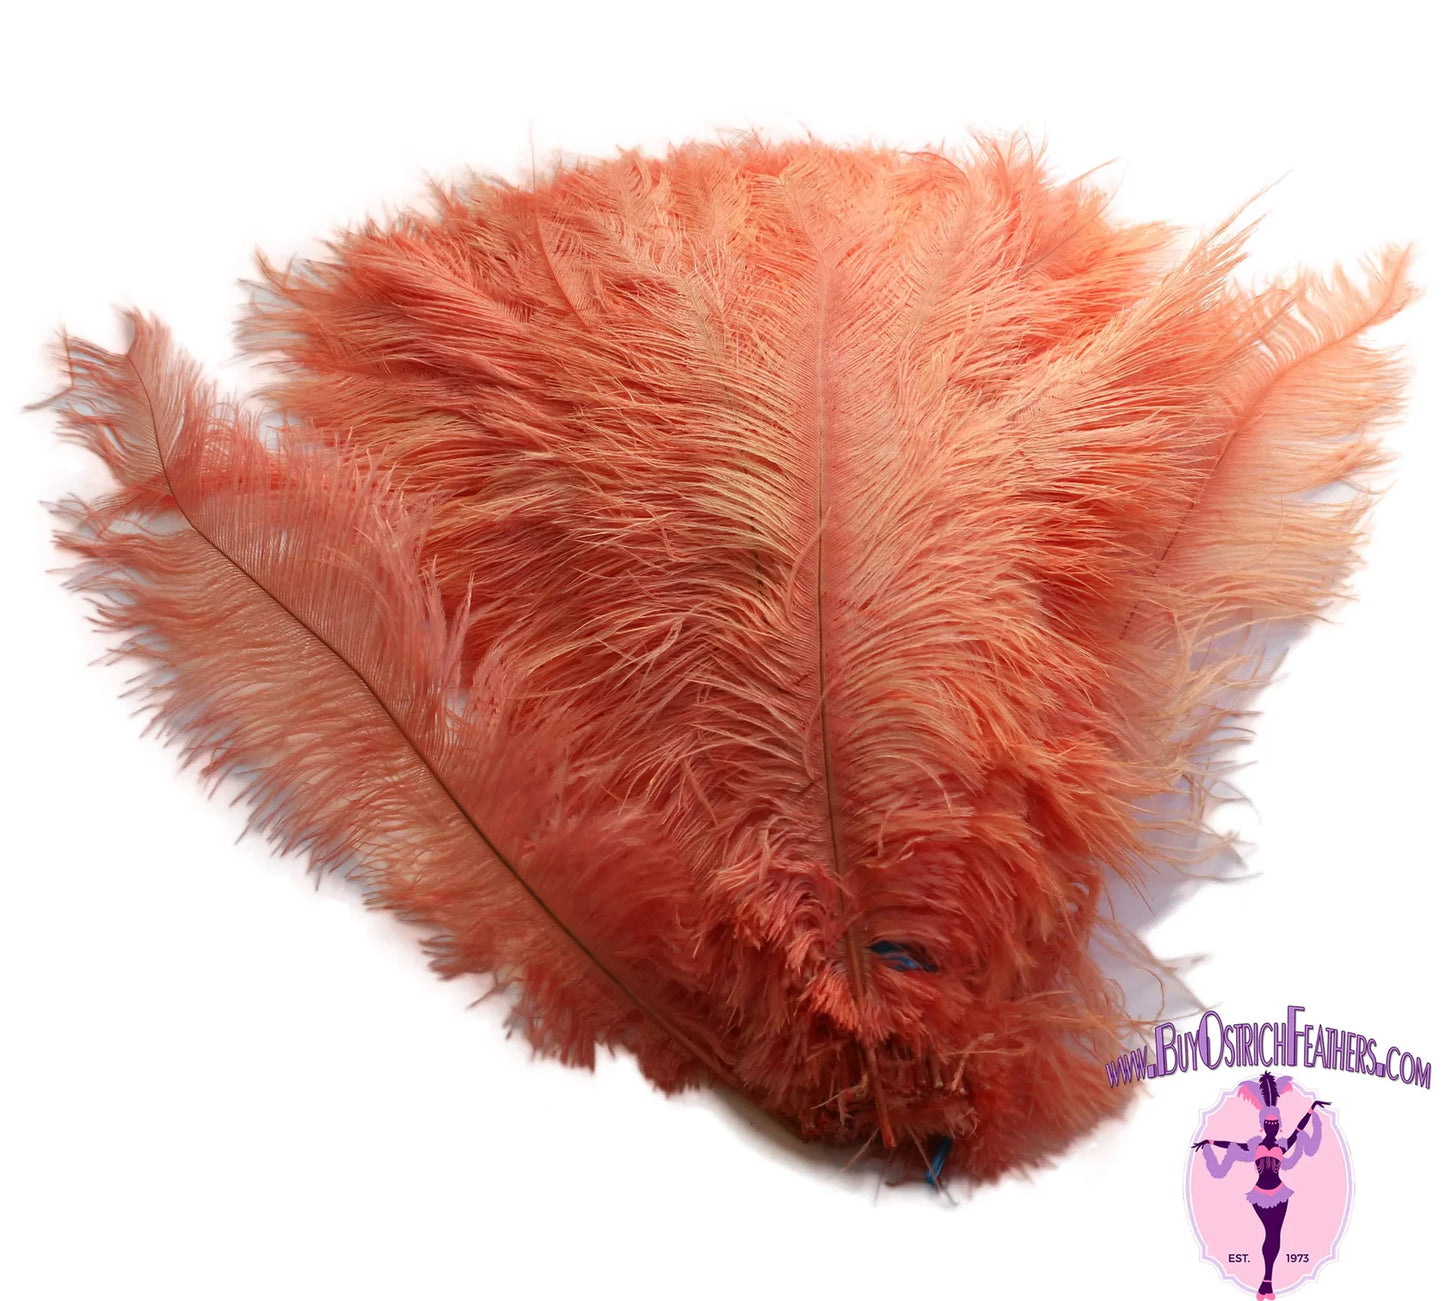 Ostrich Feather Rental 16-20" (Apricot) - 250pcs - Buy Ostrich Feathers